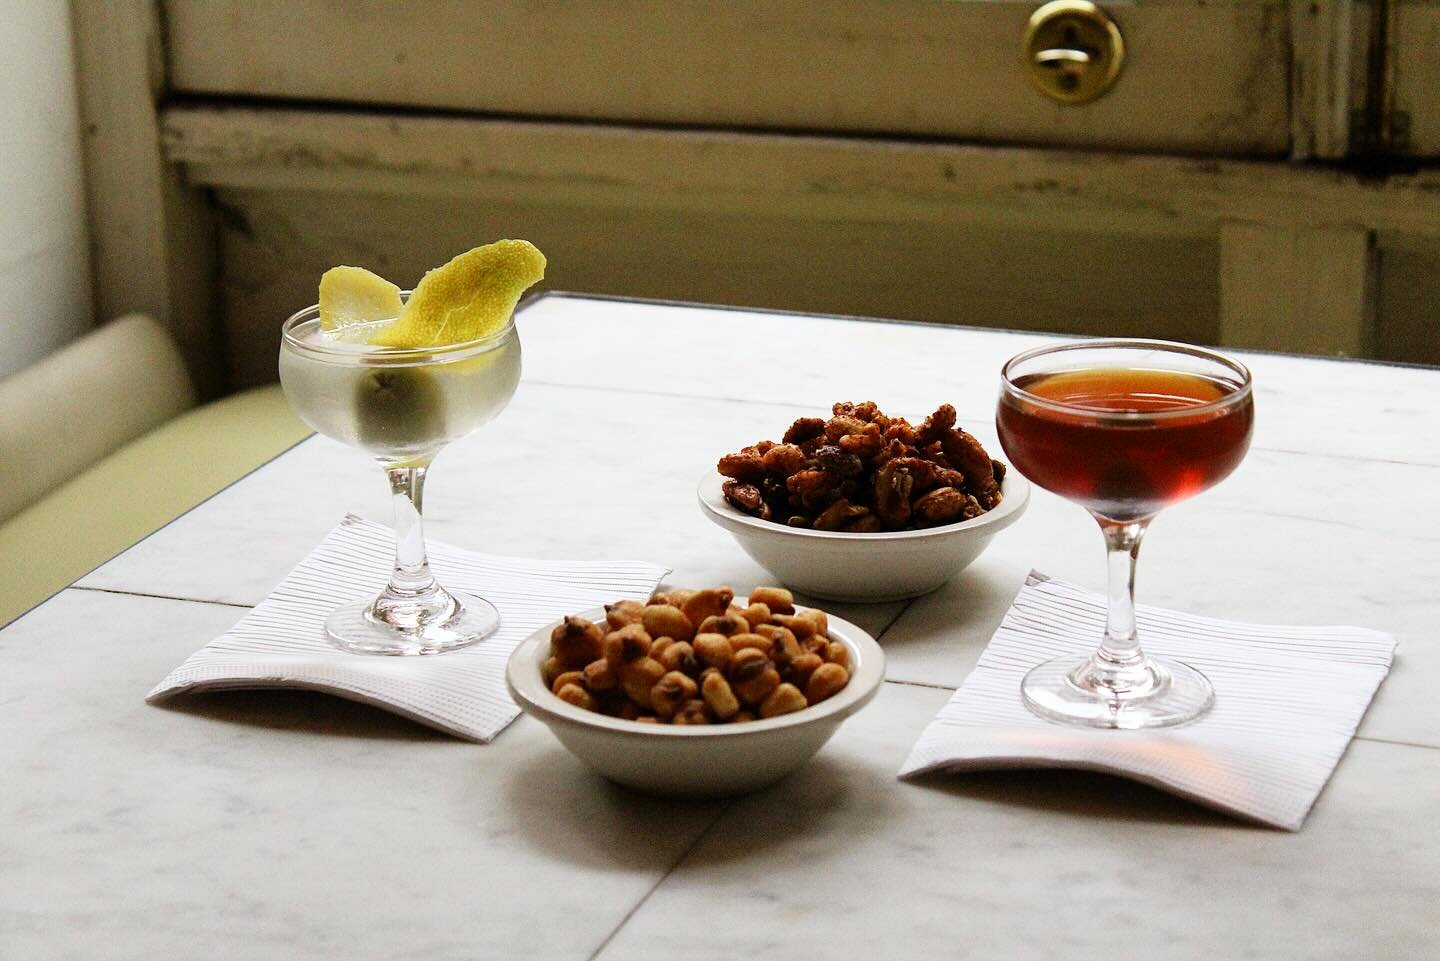 Join us in Tribeca every Monday for an homage to two of our favorite classic cocktails. All night long, at a happy hour price, Martinis &amp; Manhattans are $15. 
It feels like it&rsquo;s 2014 again and we&rsquo;re feeling the magic of the city. 

Al